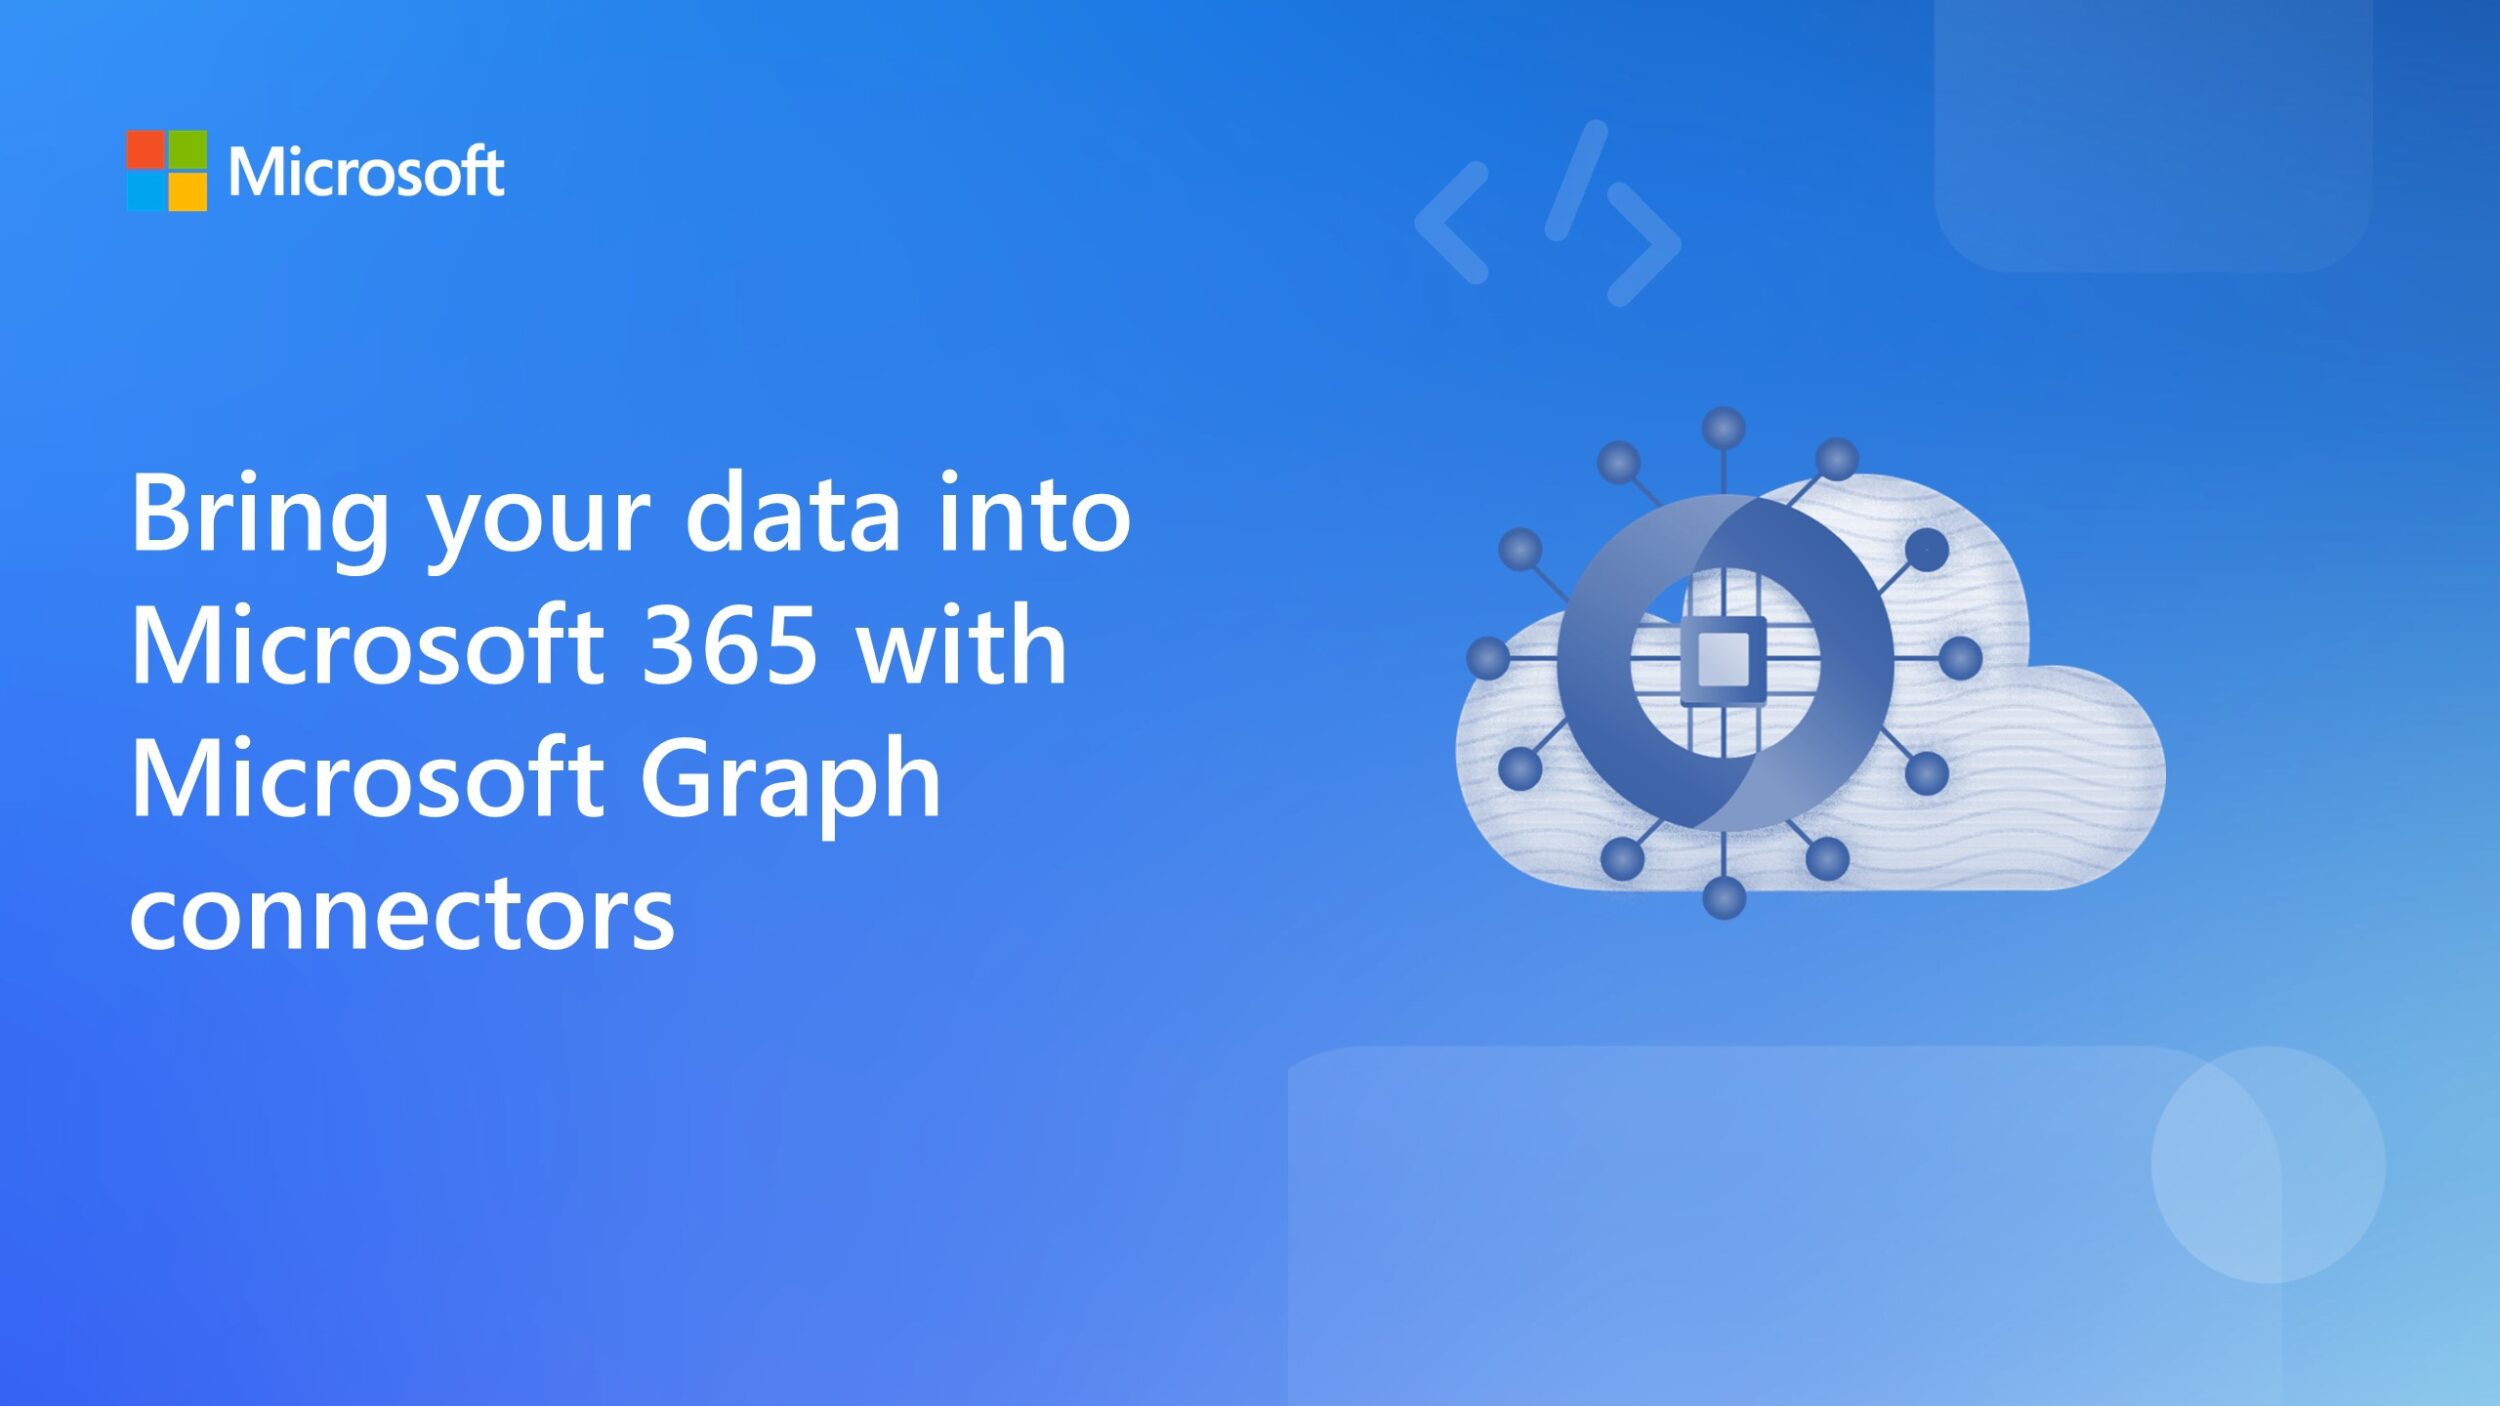 Bring your data into Microsoft 365 with Microsoft Graph connectors